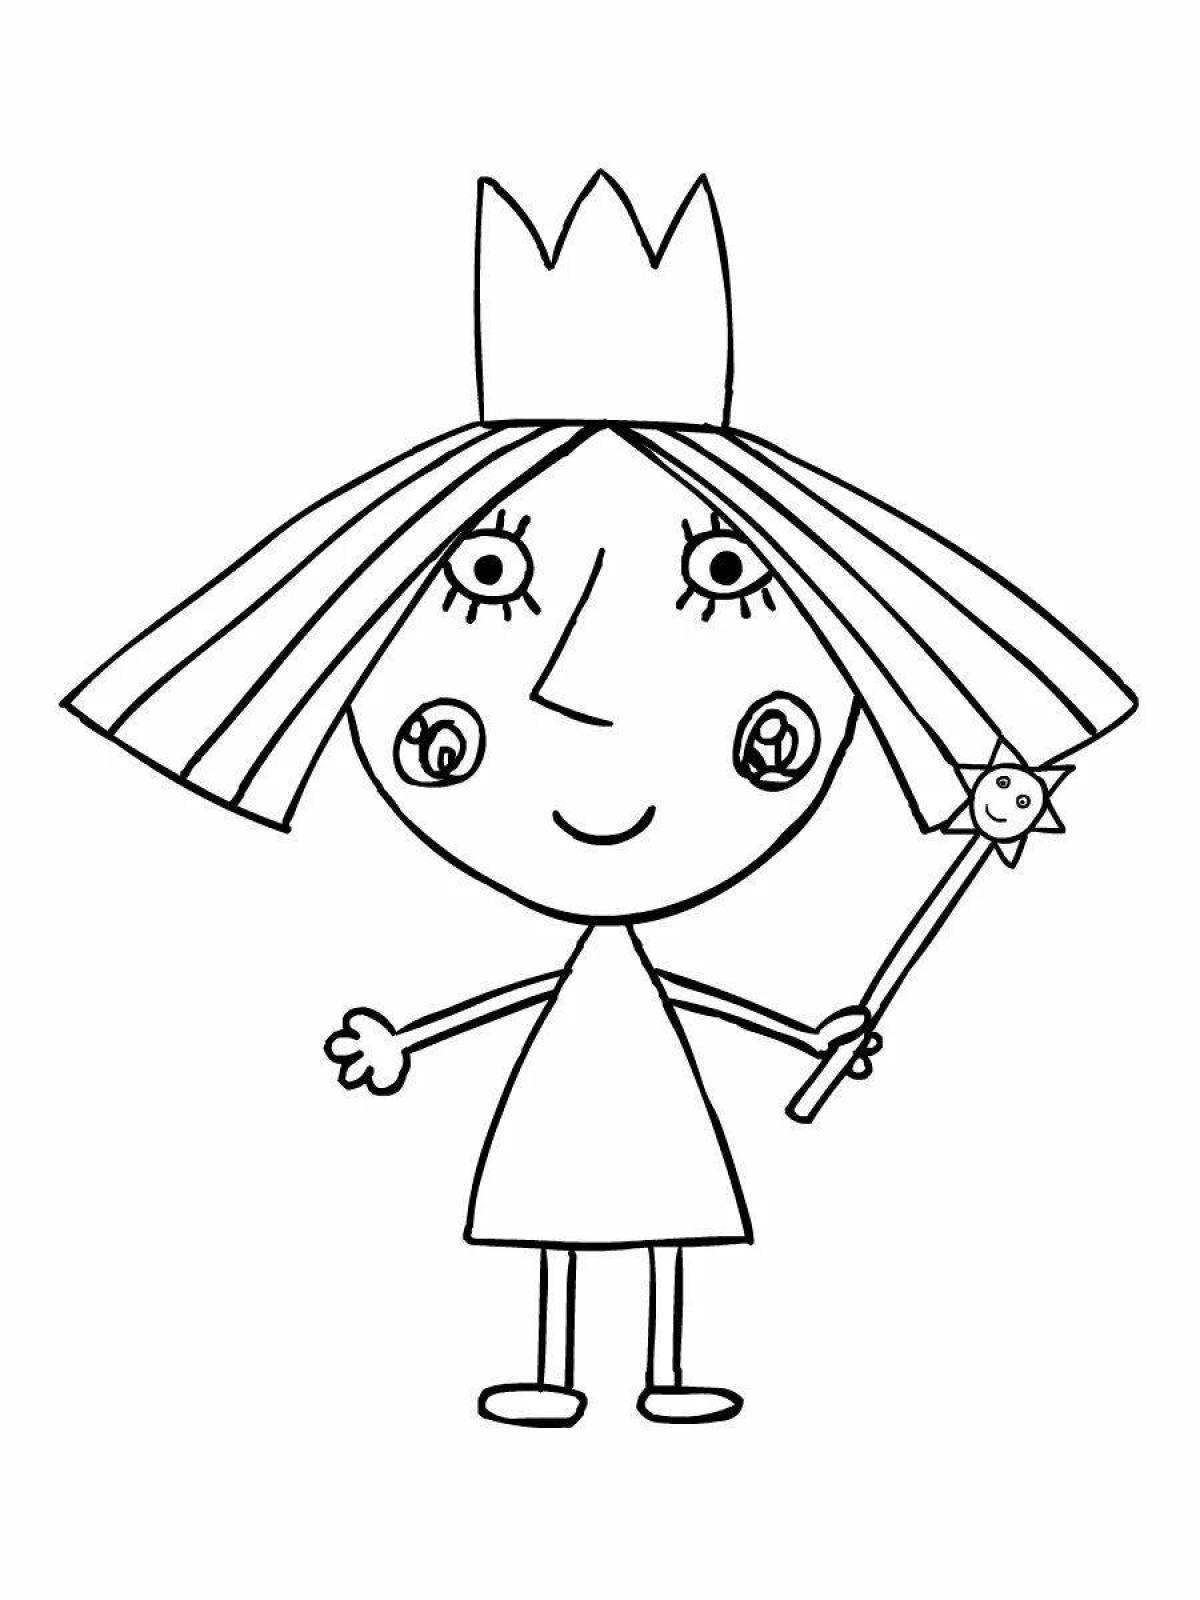 Charming ben and holly coloring page